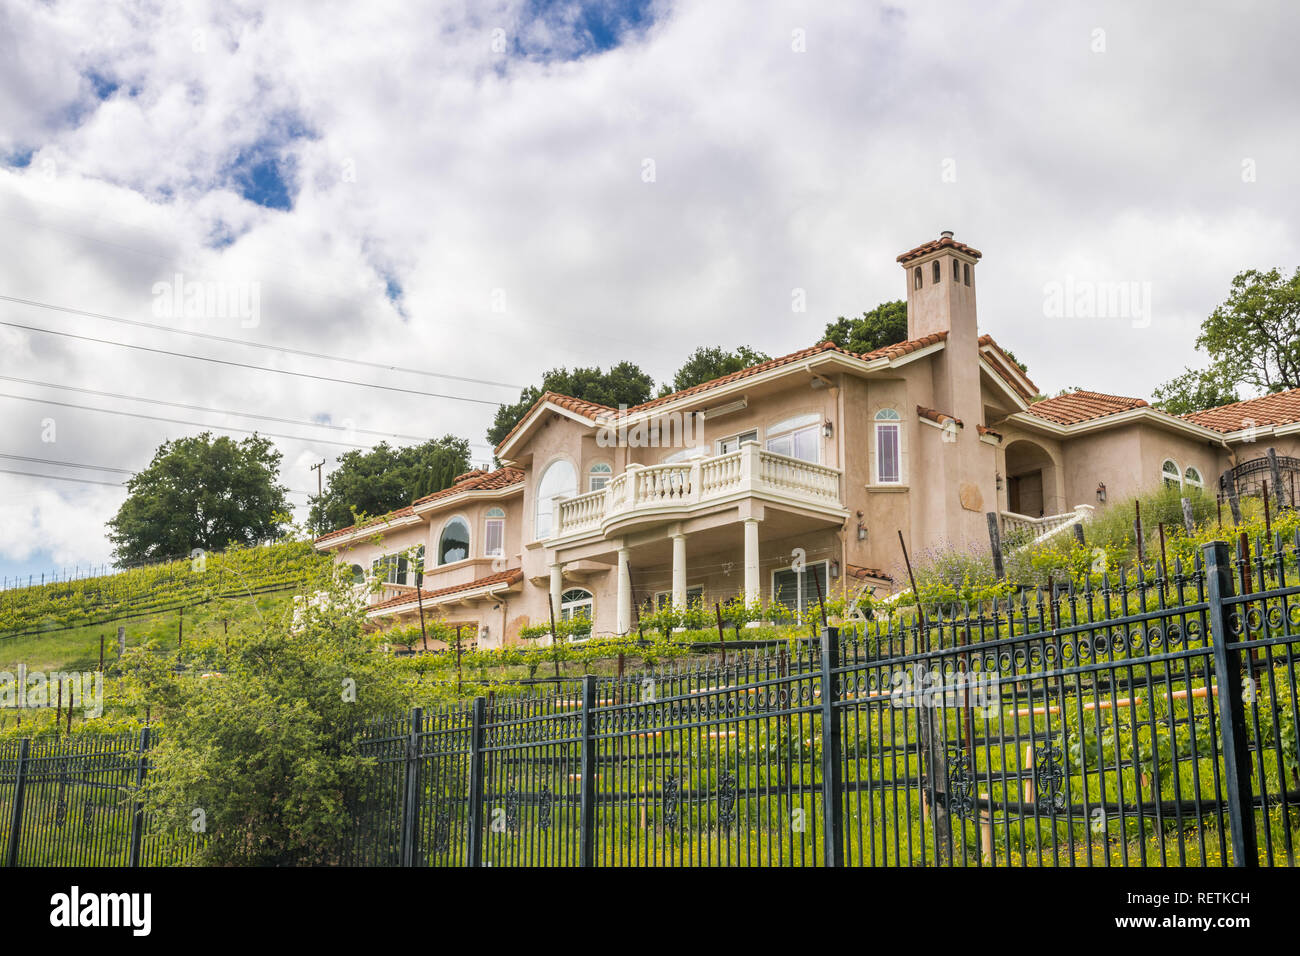 Exterior view of a large house located on the hills of Saratoga, south San Francisco bay area, California Stock Photo